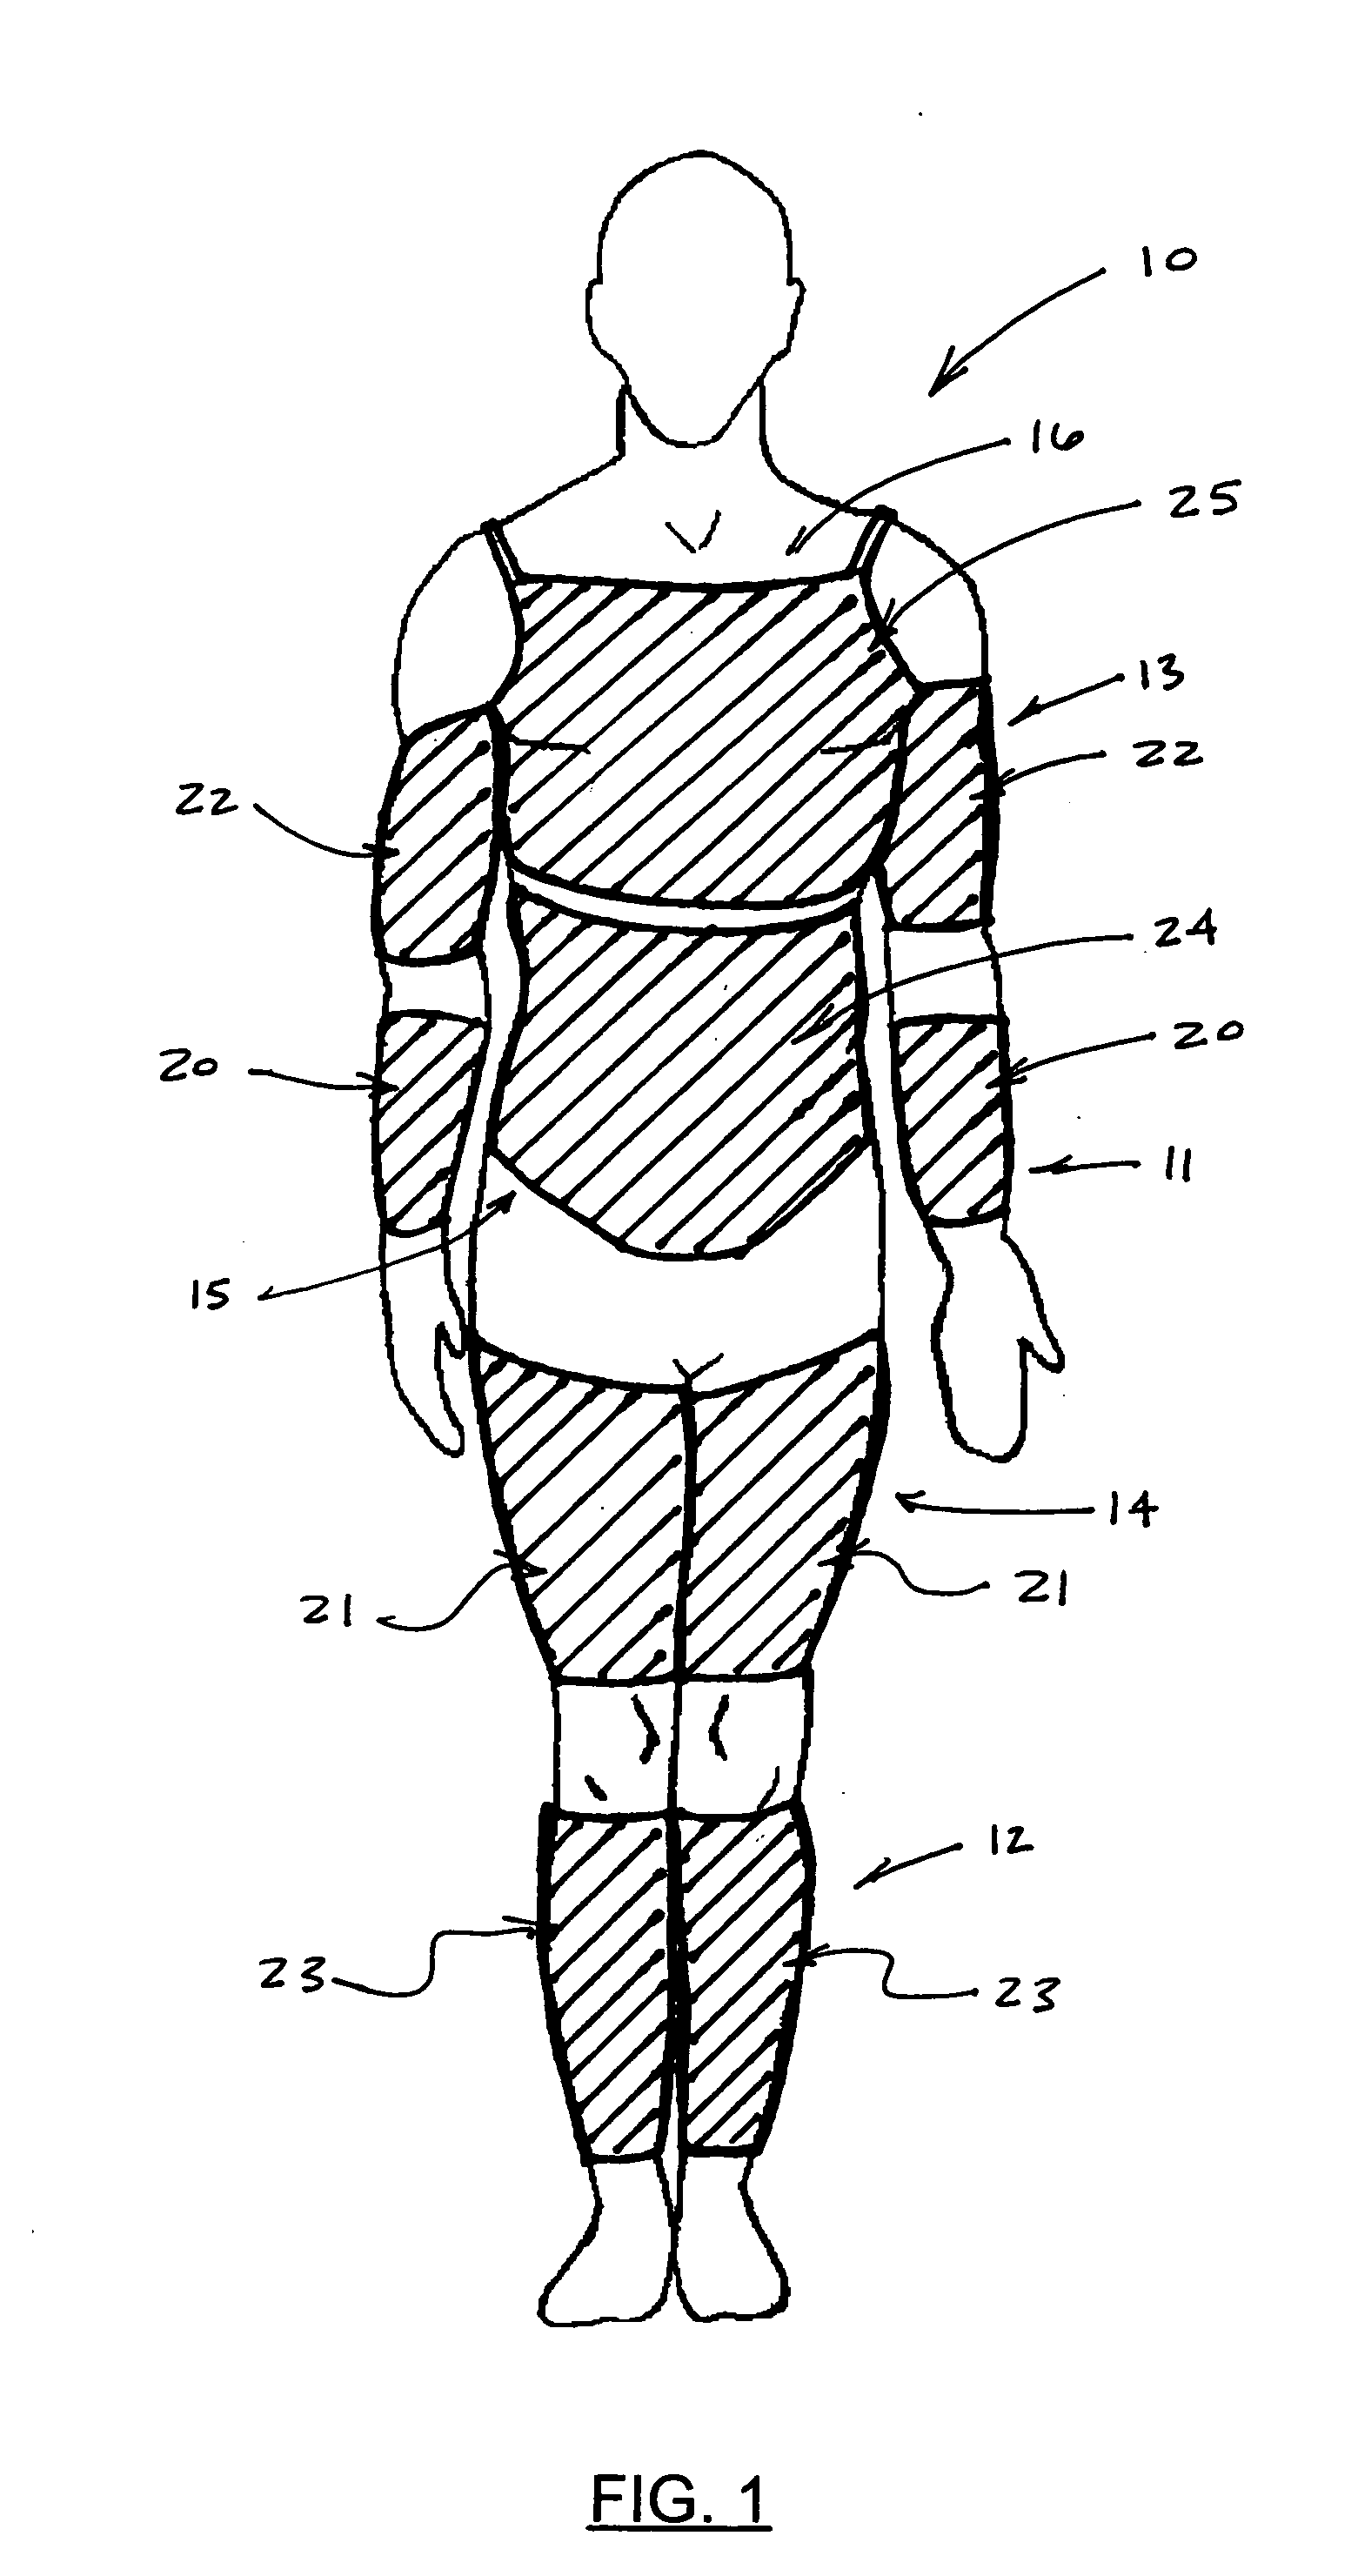 External pressure garment in combination with a complementary positive pressure ventilator for pulmocardiac assistance